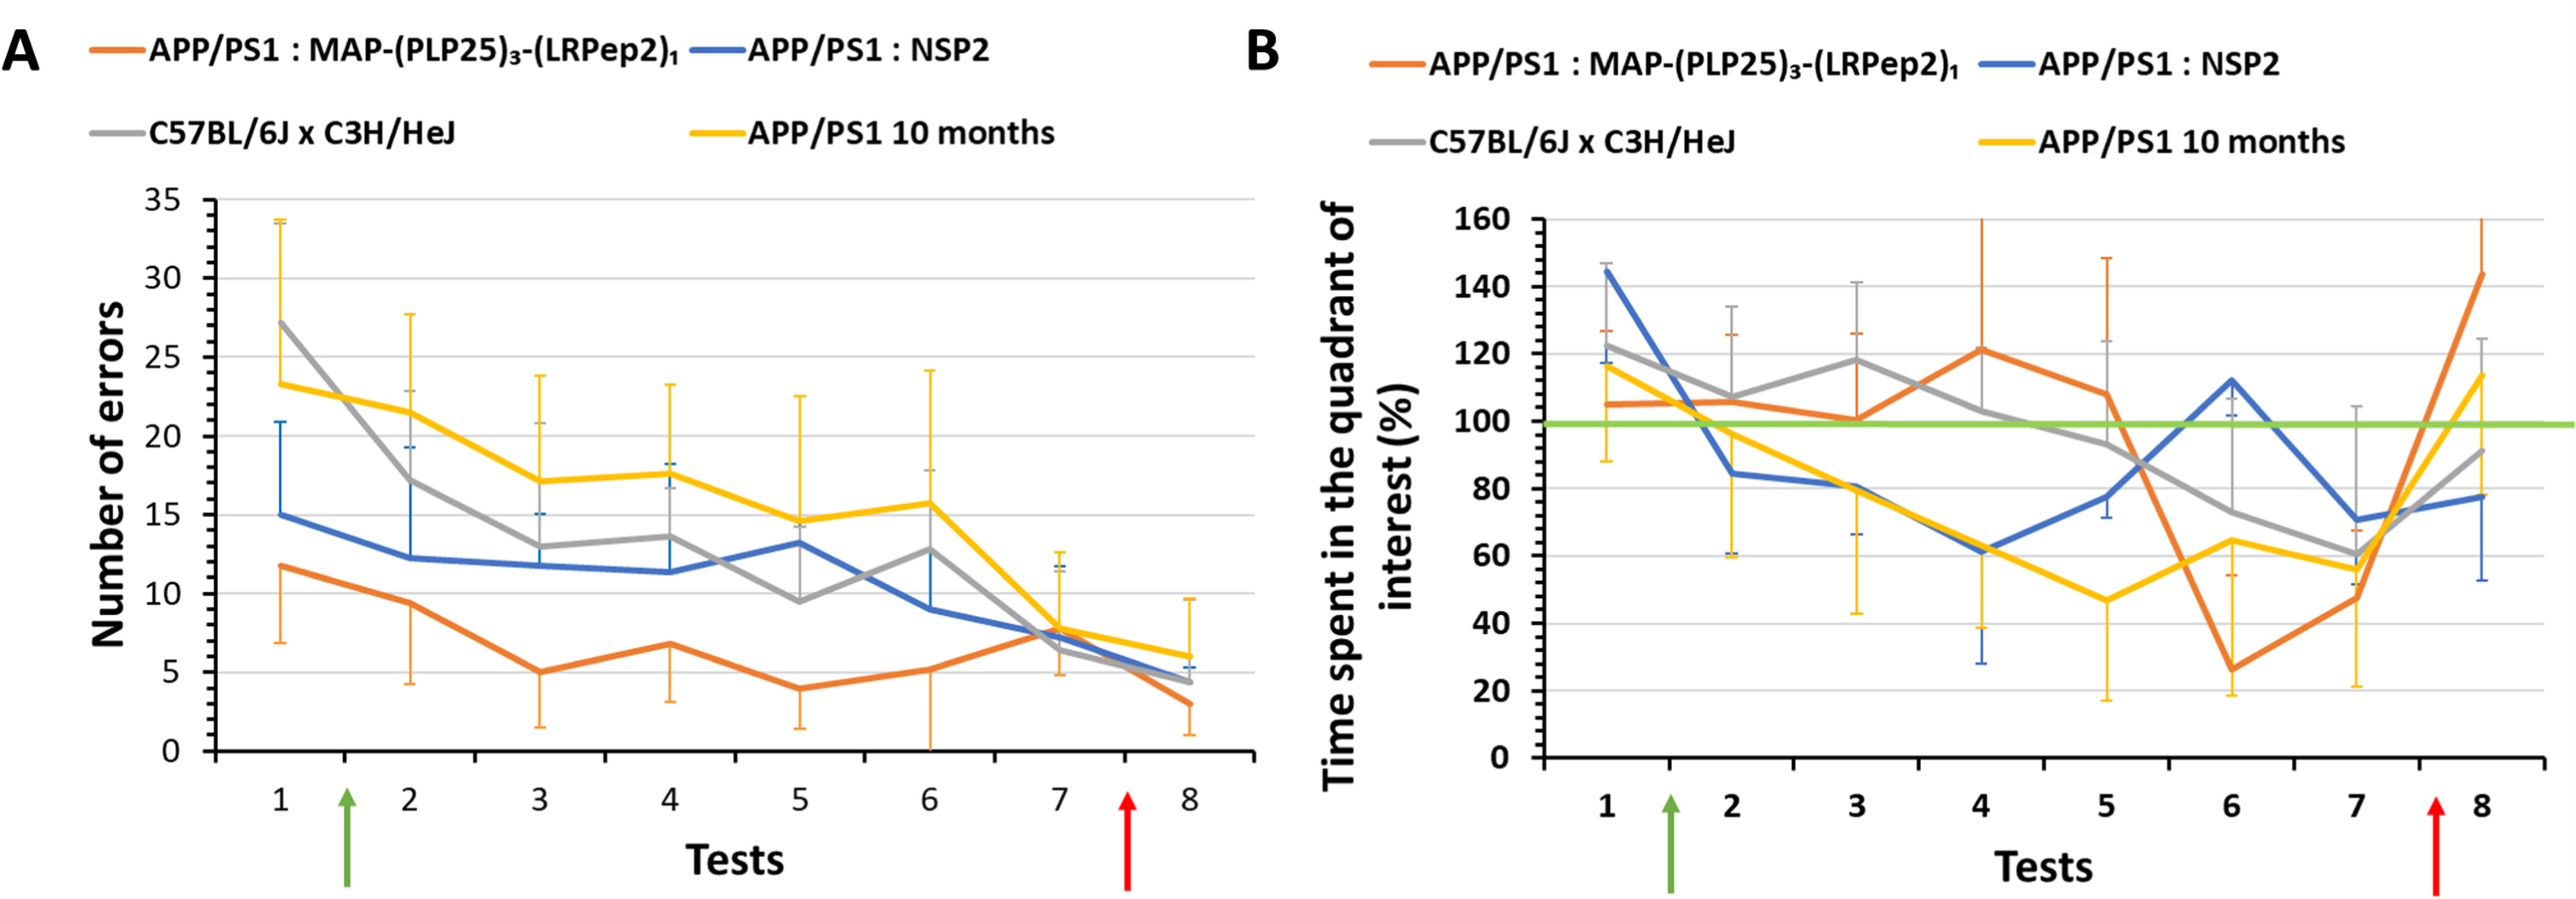 Evaluation of the spatial memory (Barnes maze) of healthy (C57BL/6J x Hej, n = 8) and APP/PS1 mice treated with MAP-(PLP25)3-(LRP2)1 (n = 5), NSP2 (n = 5) or non-treated (APP/PS1 10 months, n = 8). A) Total number of errors; B) Percentage of time spent in the quadrant of interest normalized to the individual performances in the last learning day. Green arrows correspond to the start of the treatment (4 days after the first test), red arrows correspond to the “relearning” step. Tests 1 to 7 were performed once a week, while test 8 was carried out 4 days after the test 7. Statistics are regrouped in the Supplementary Tables 1 and 2.